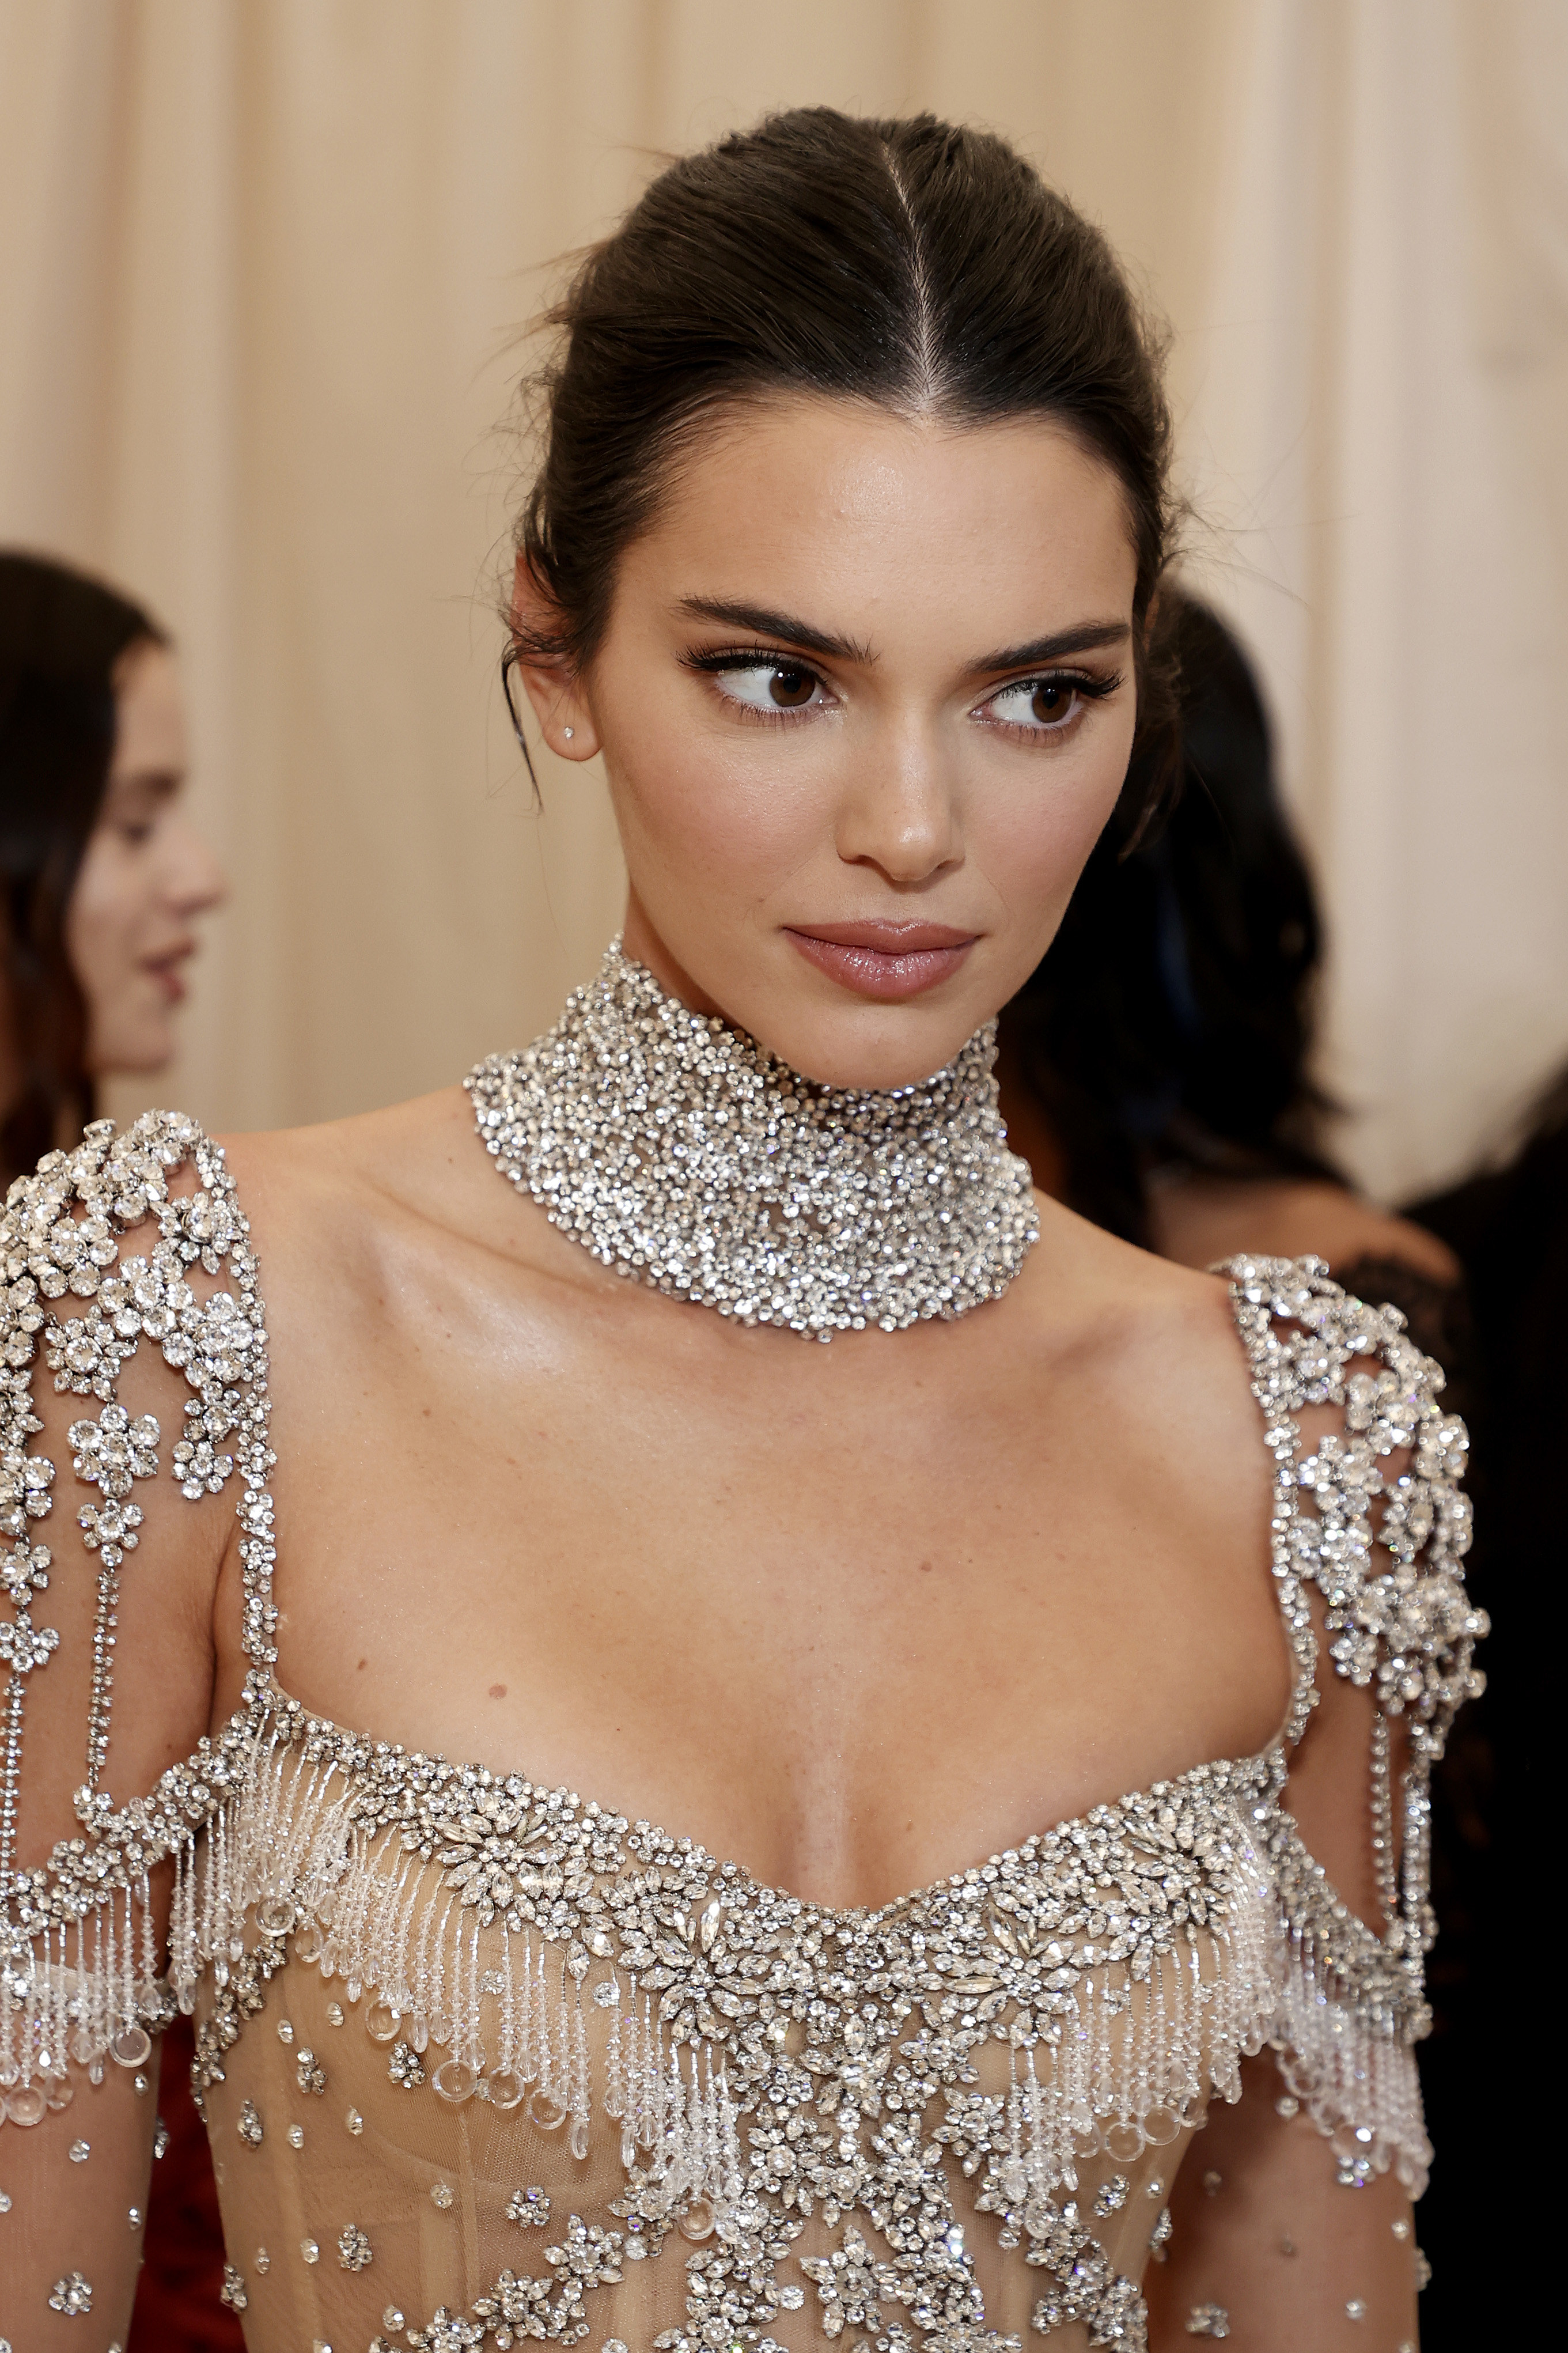 Close-up of Kendall wearing a bejeweled outfit and choker necklace